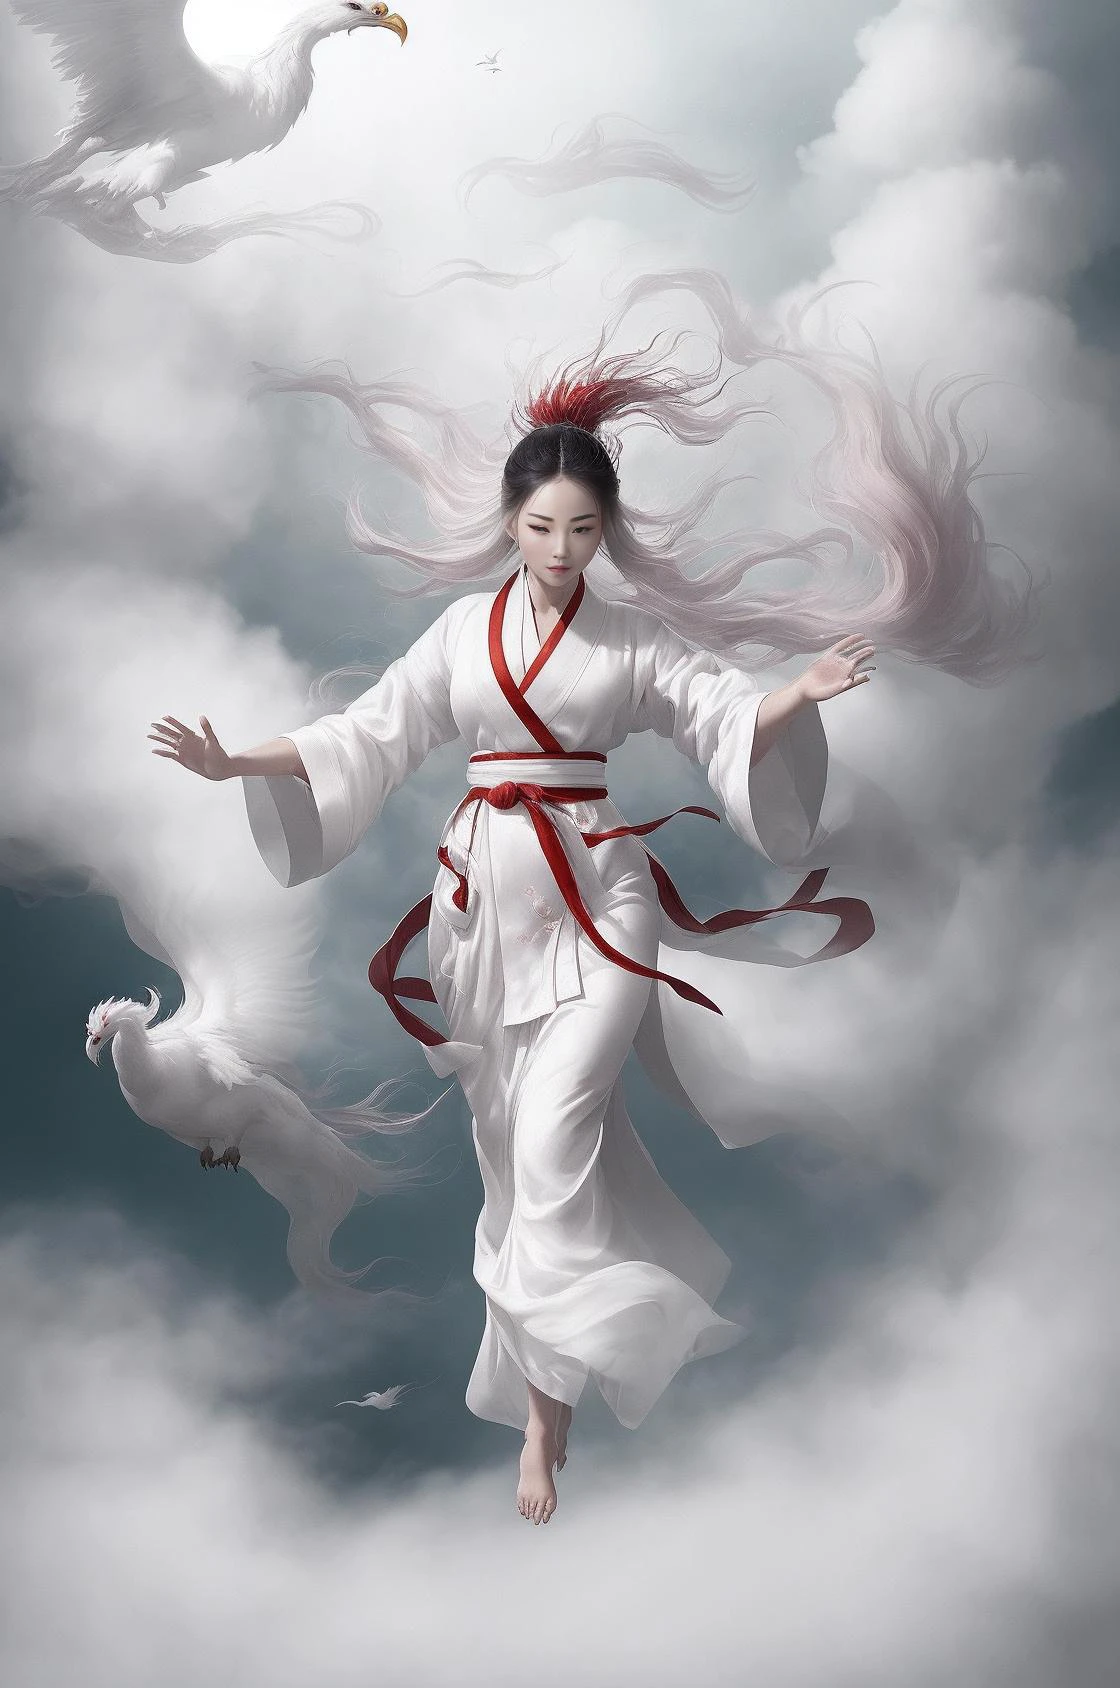 1 girl,(white Chinese robe),
In a captivating scene, a beautiful woman adorned in a flowing white Chinese robe soars through the misty clouds on the back of a majestic Chinese phoenix. The wind gently lifts her robe, accentuating the sense of flight as they gracefully navigate the ethereal cloudscape.